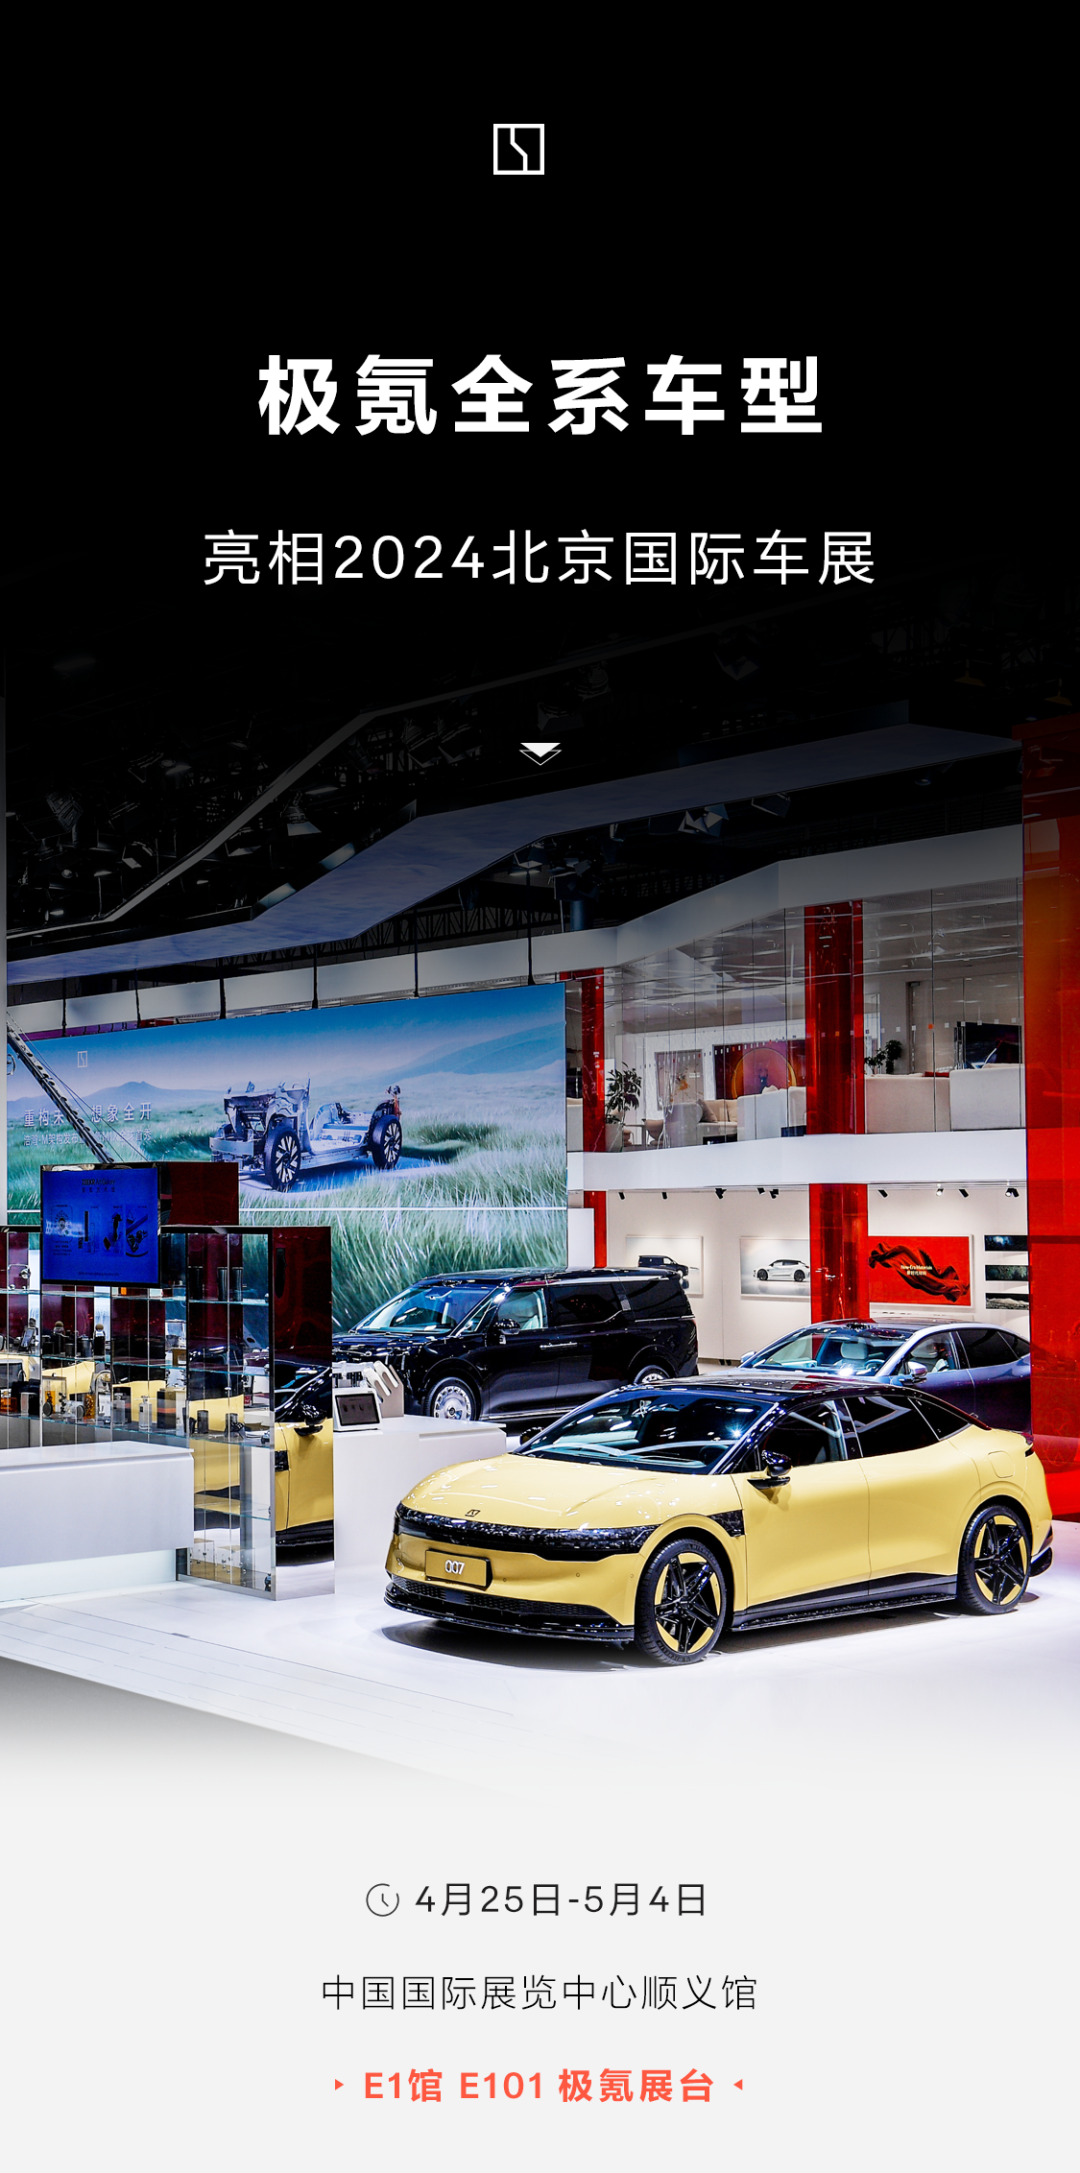 Jikrypton’s full range of models unveiled at the 2024 Beijing Auto Show